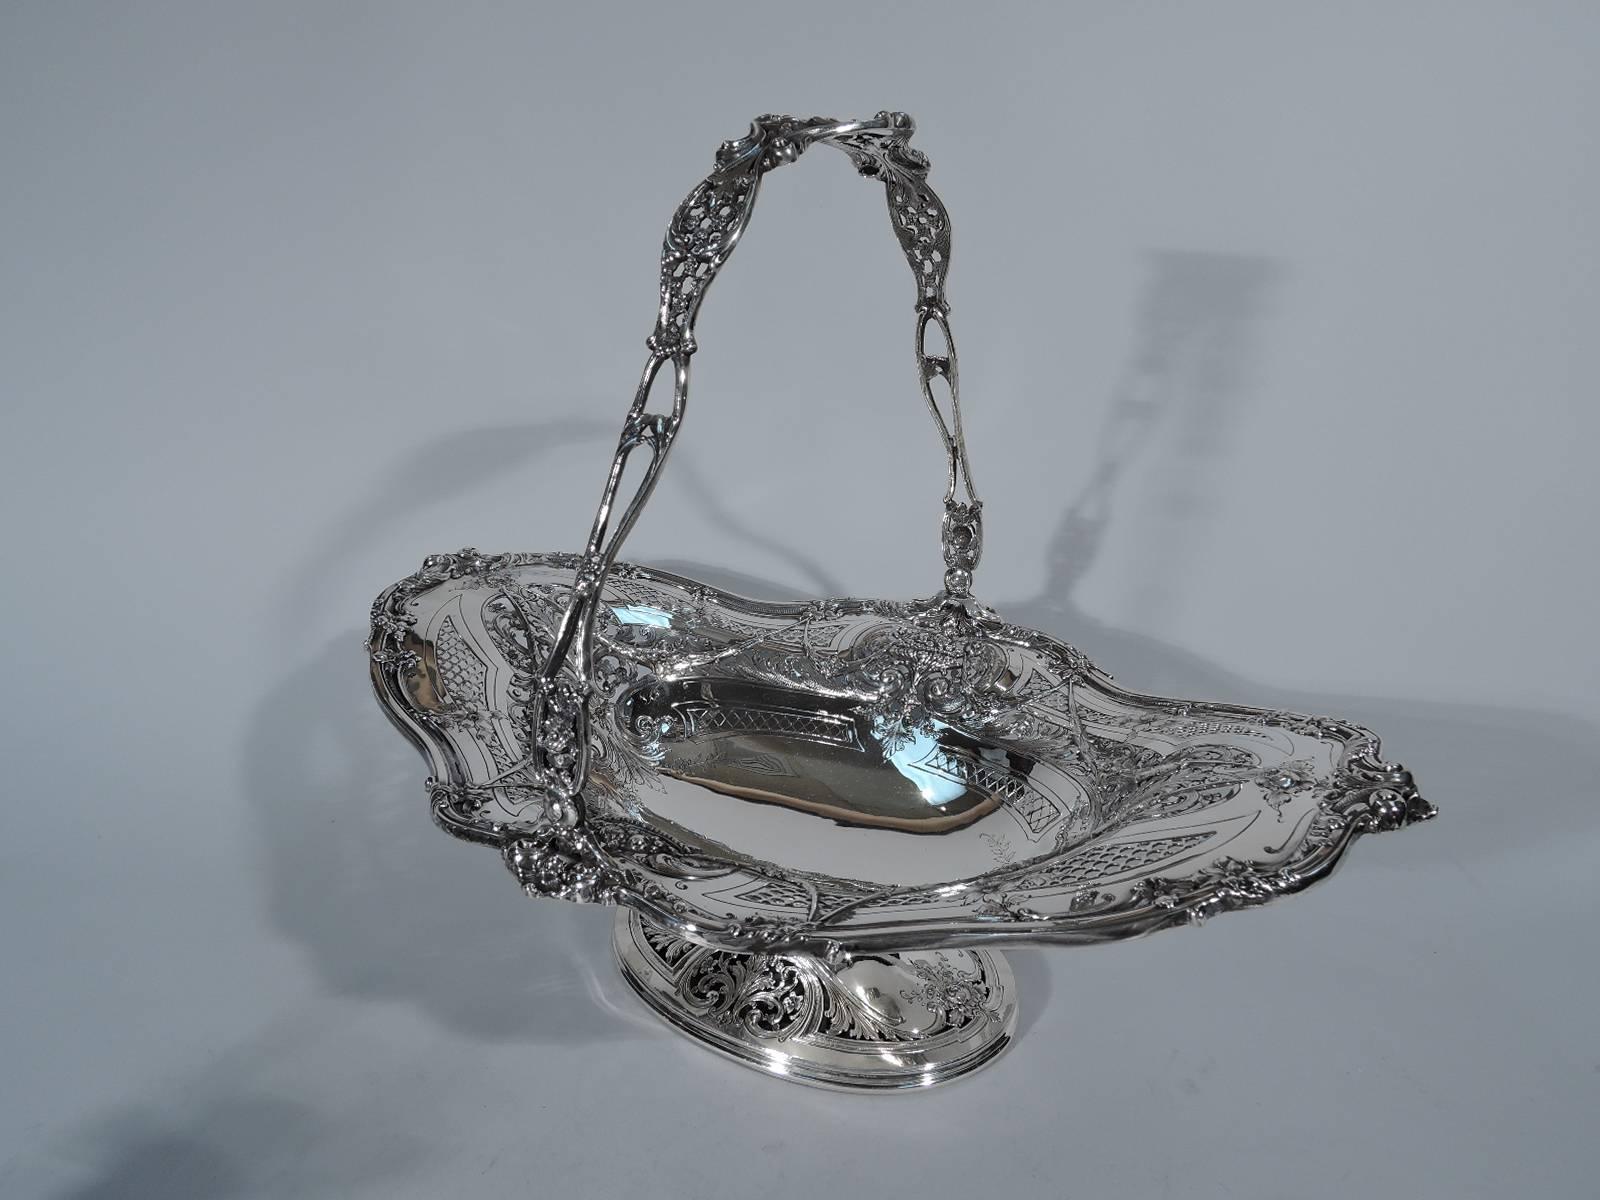 Fancy sterling silver basket. Made by Black, Starr & Frost in New York, circa 1885. Oval well with flared and asymmetrical rim, raised oval foot, and swing handle. Flowers, foliage, swags, and scrolls – the works. Lavish turn-of-the-century fashion.